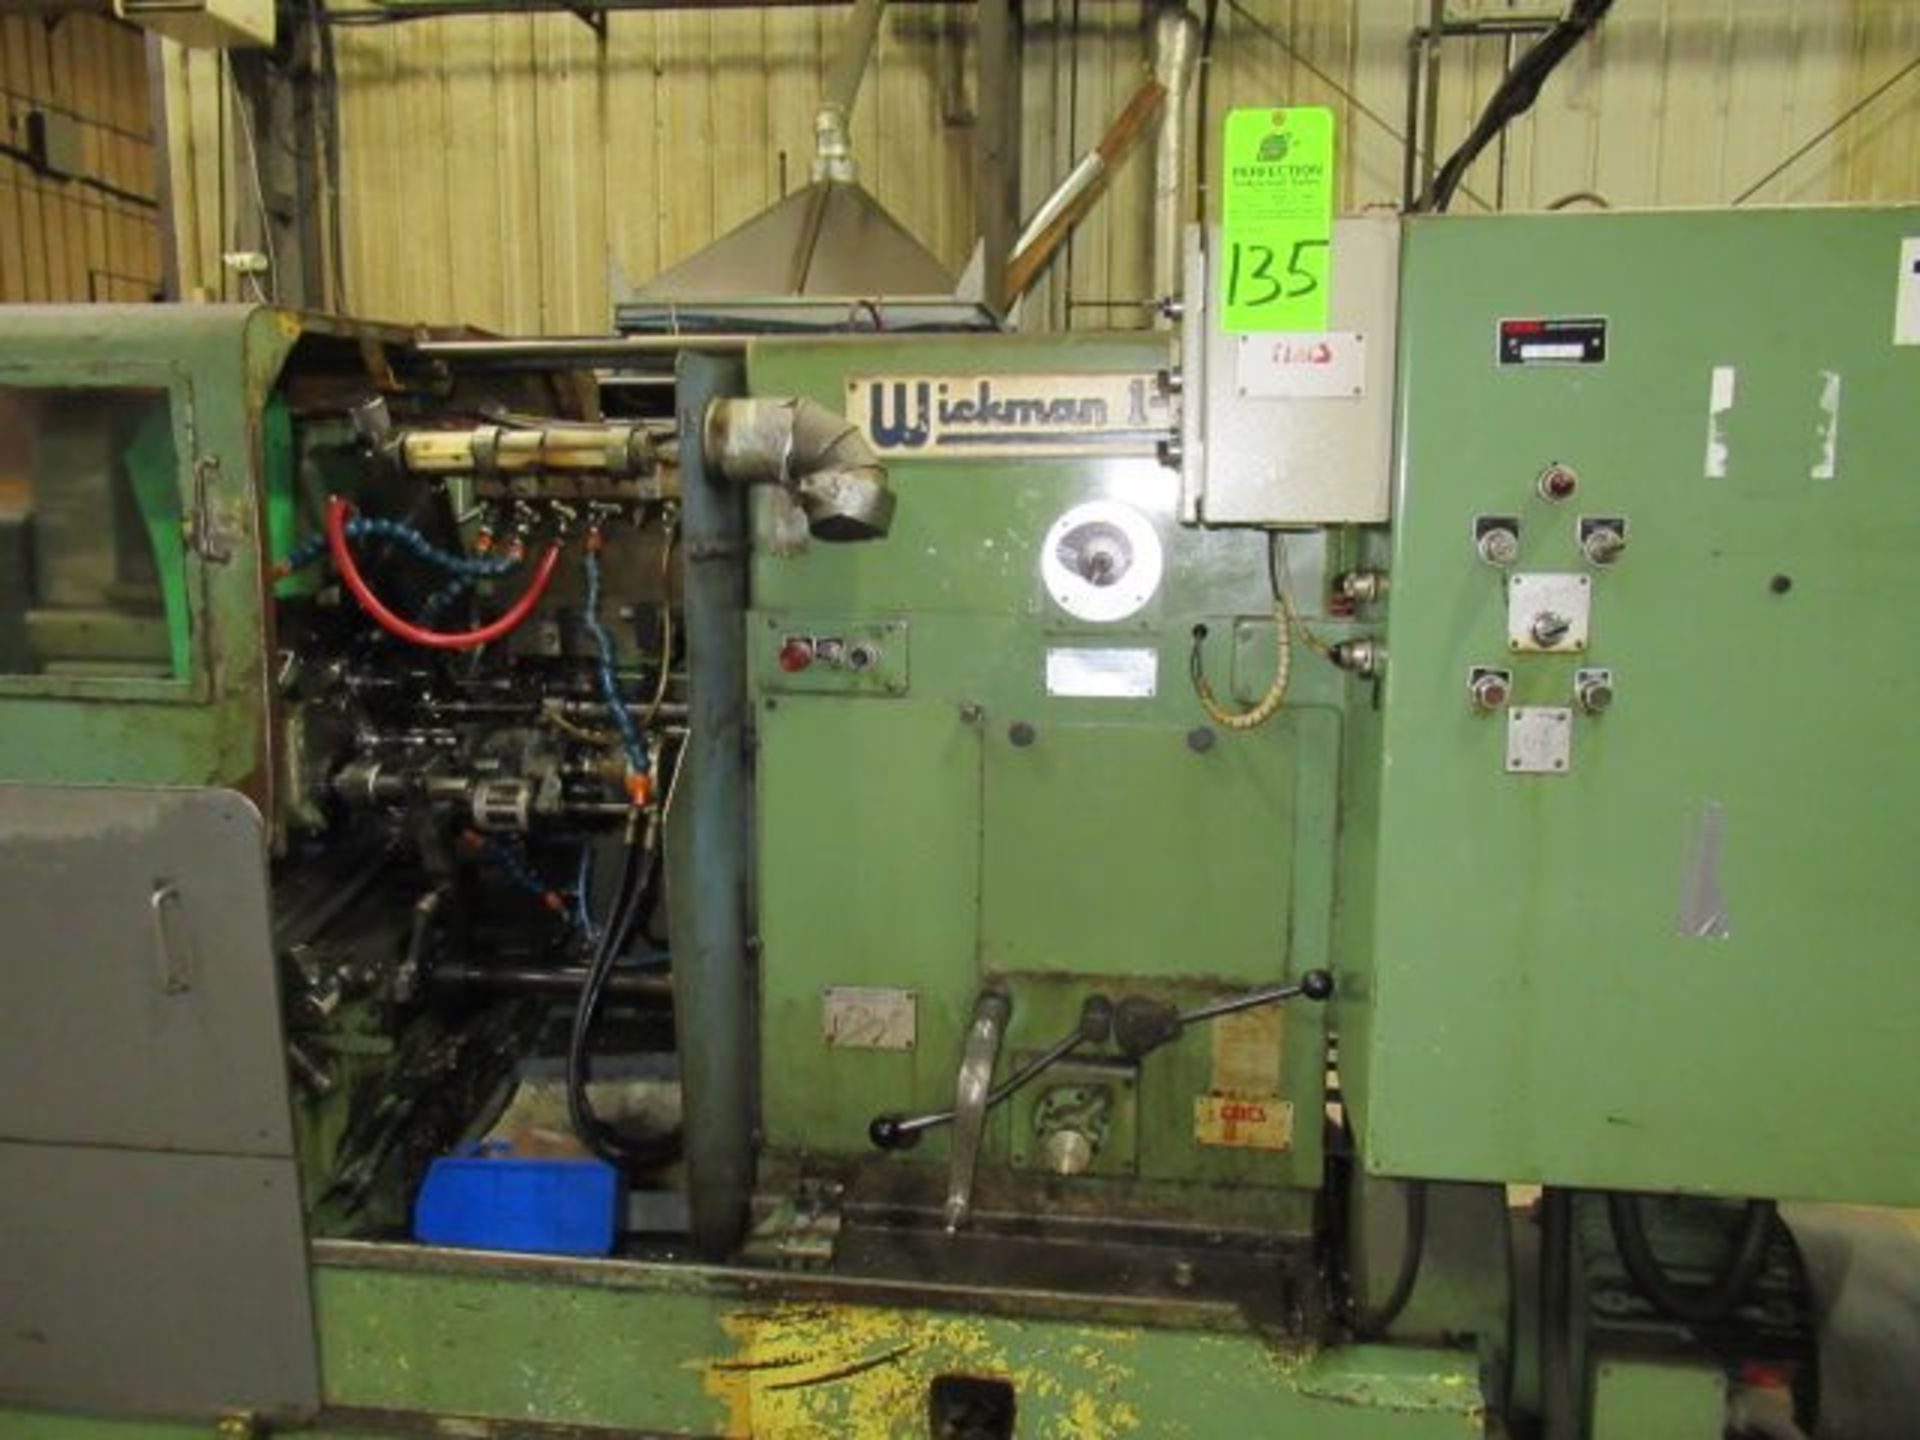 WICKMAN 1"-6S Special Long Bar Feed Bar Machine, s/n 46/556 ($1500 Rigging Cost)